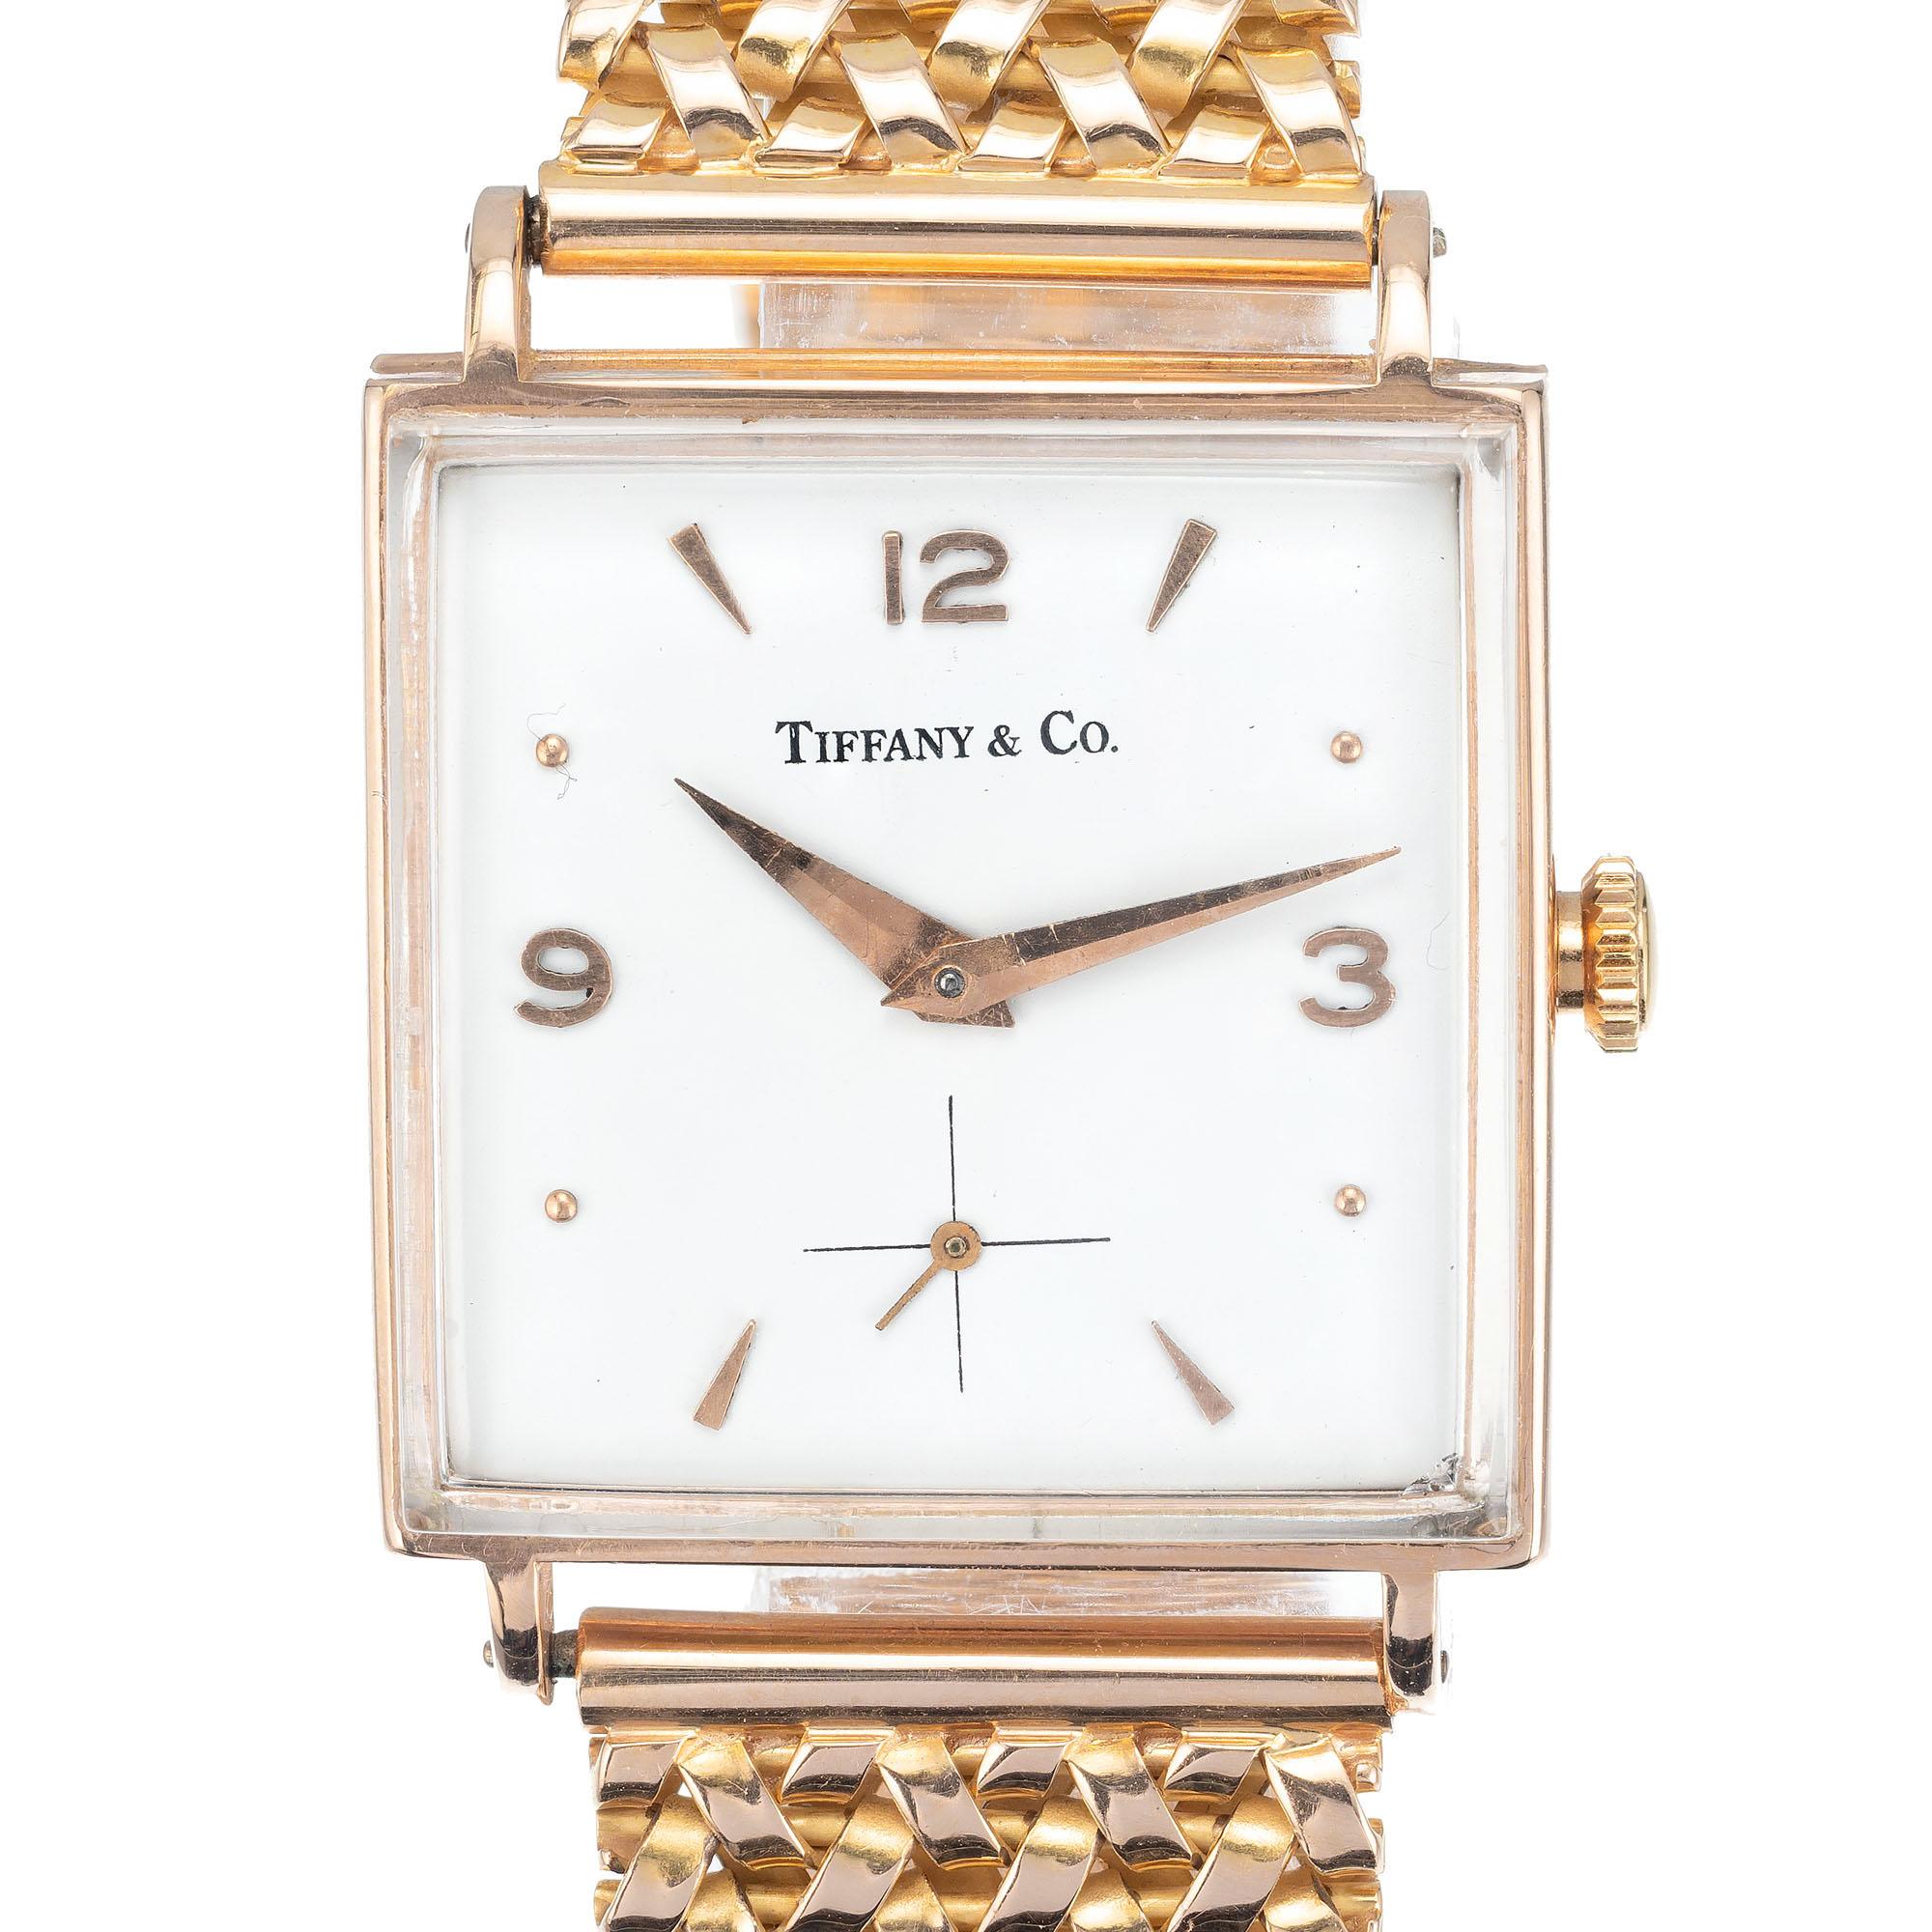 1950's Tiffany & Co Universal Geneve 18k Rose gold watch with rose gold mesh band and off white dial with rose gold markers and hands.

18k rose gold
70.5 grams
Strap length: 7 ¼ to 7 5/8 inches
Length: 34.75mm
Width: 27mm
Band width at case: